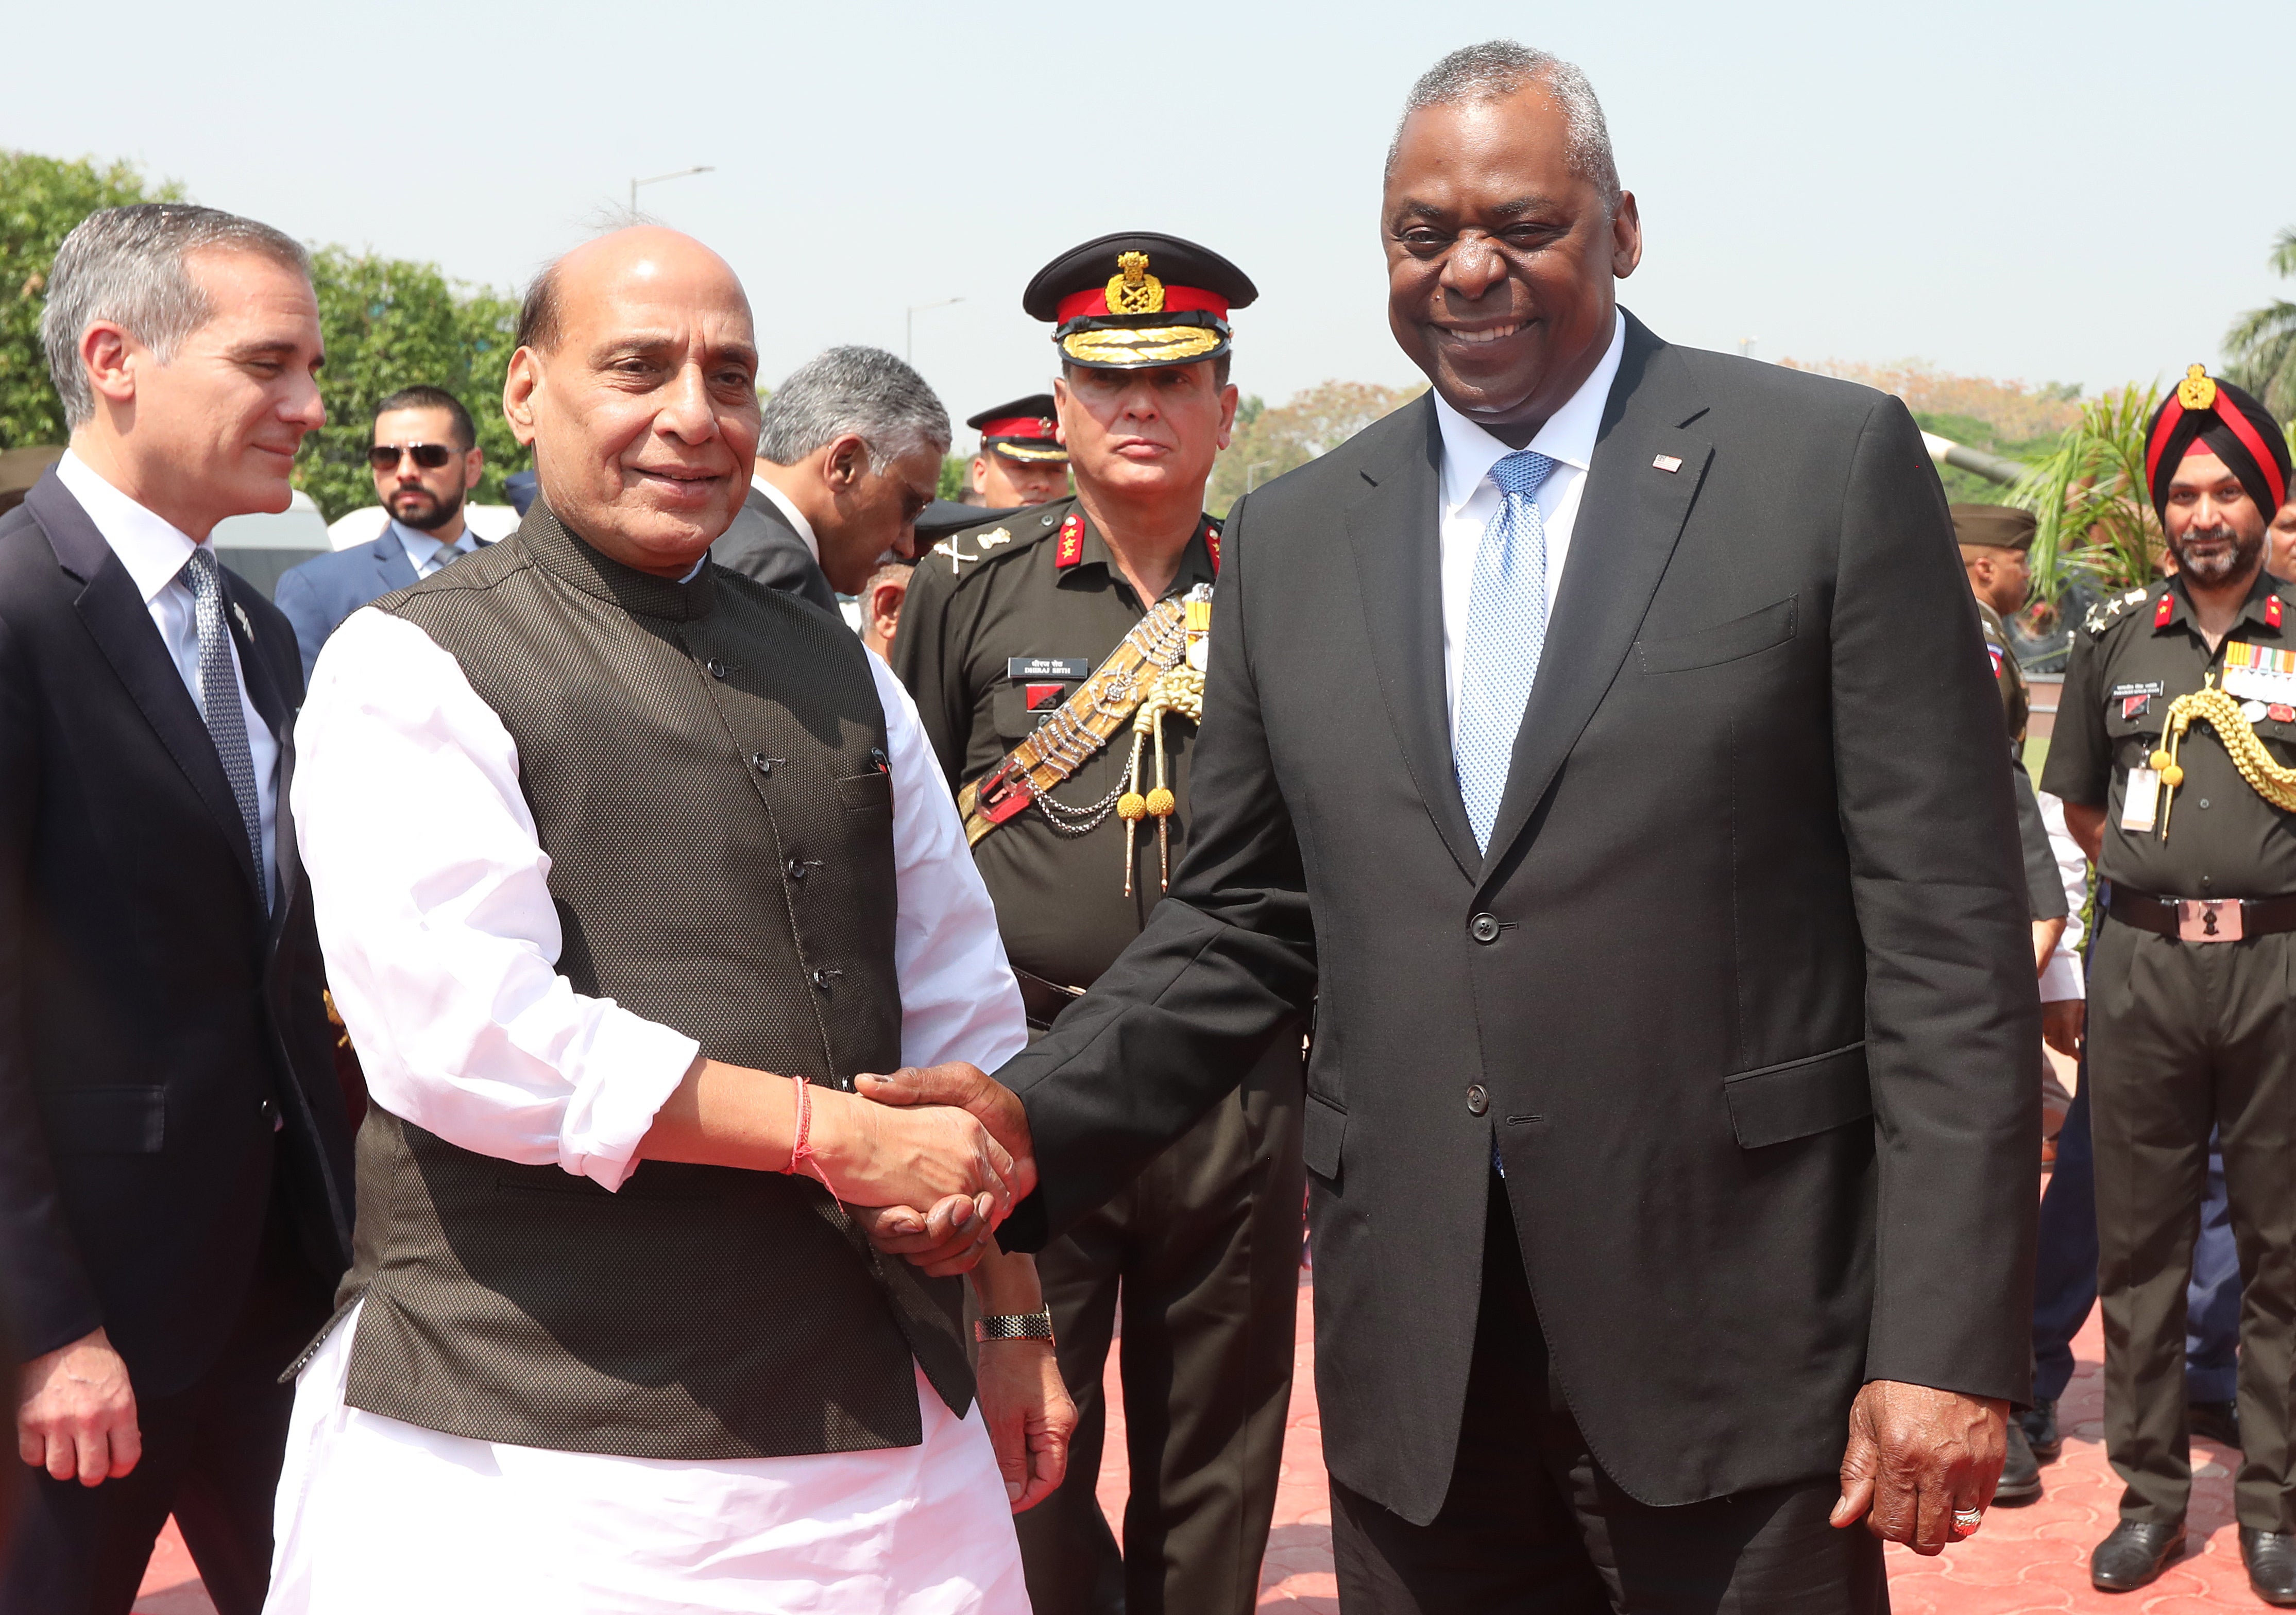 US Defence Secretary Lloyd Austin (R) shake hands with Indian Defence Minister Rajnath Singh during a ceremonial welcome ceremony